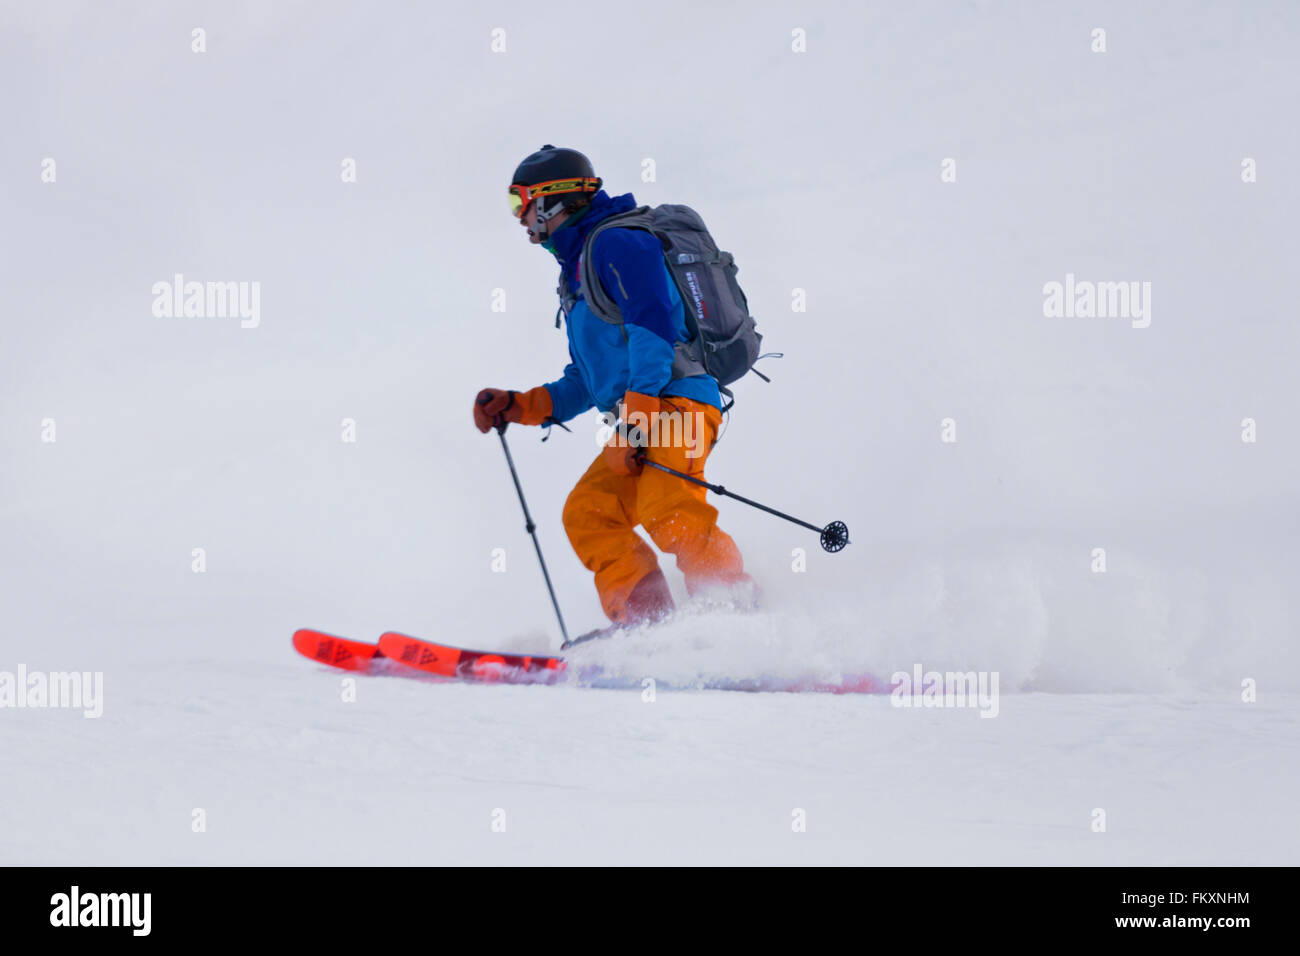 Man skiing with snow cloud Stock Photo